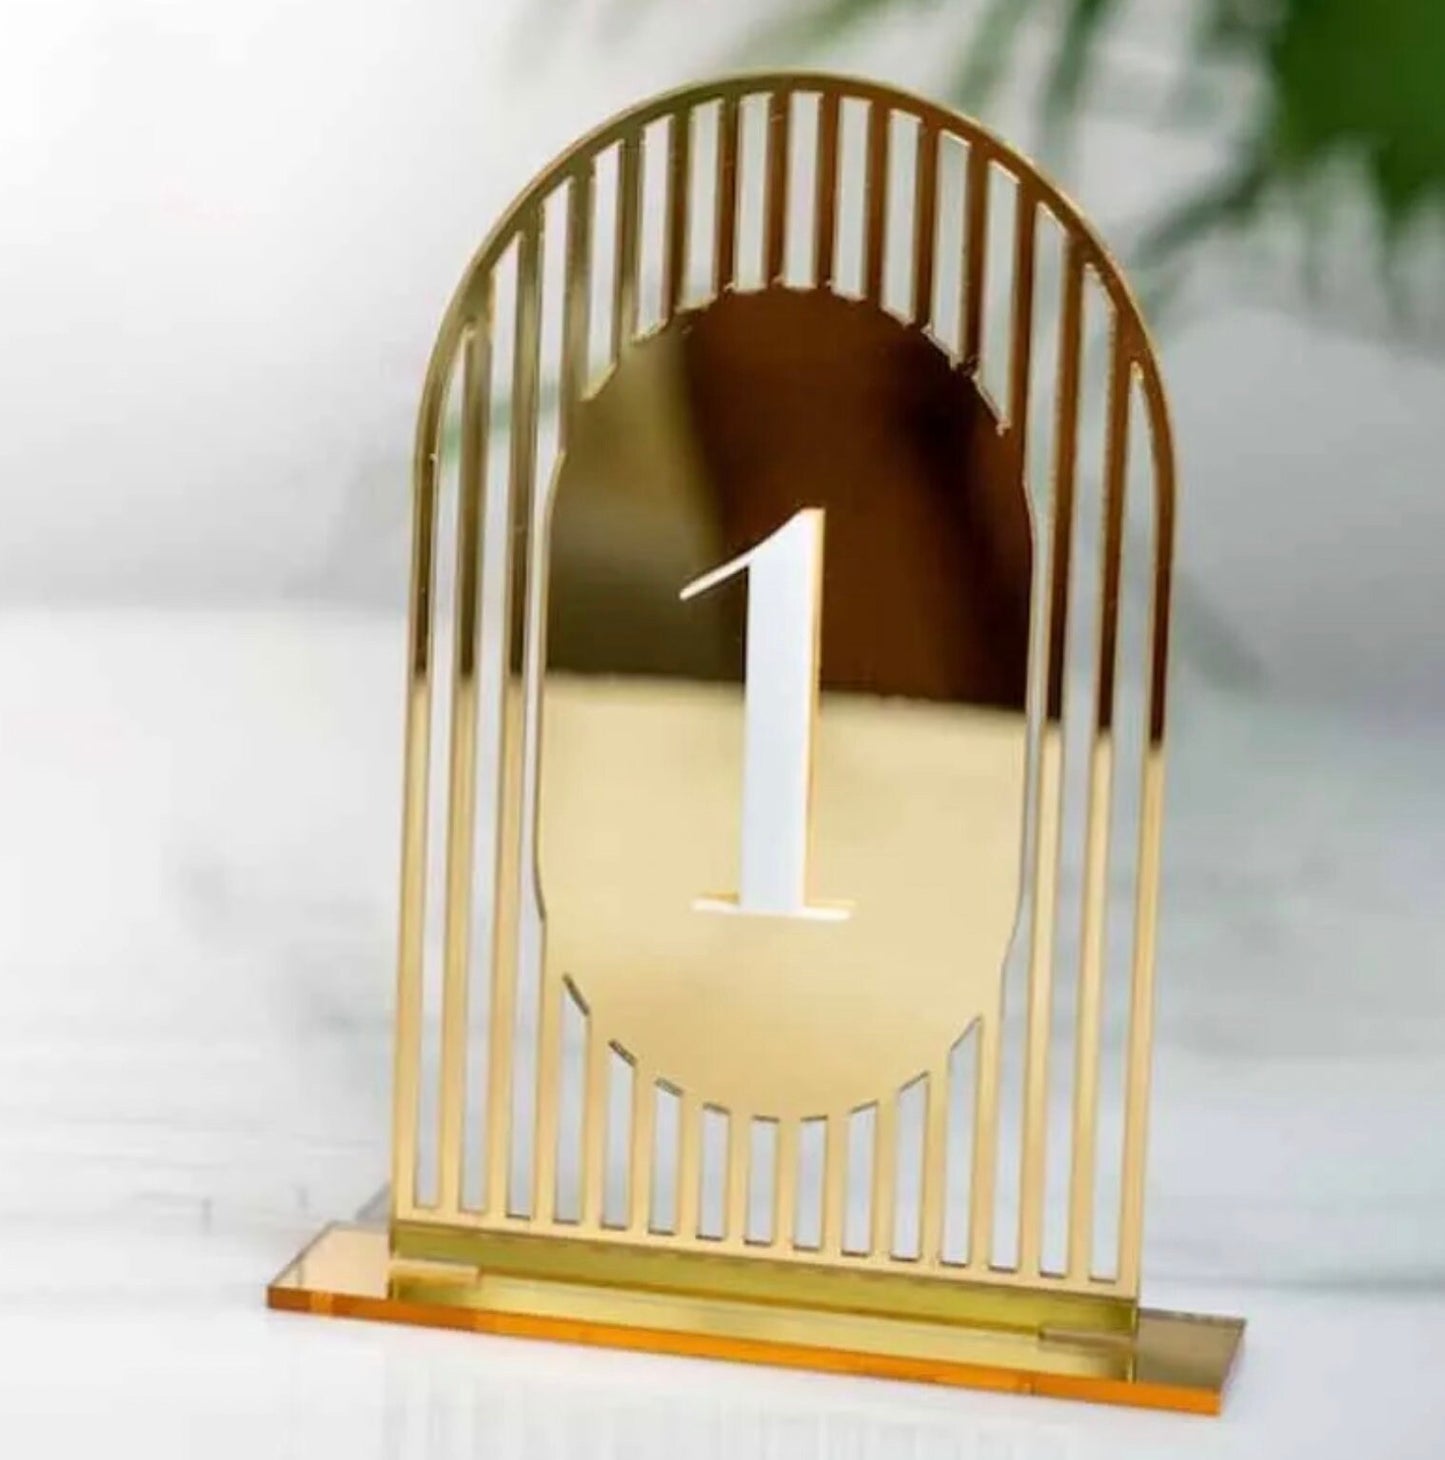 Elegant Gold Frame Acrylic Freestanding Table Sign Holders, Number Display Stands, Wedding Frames, Event Table Numbers, Anniversary Table